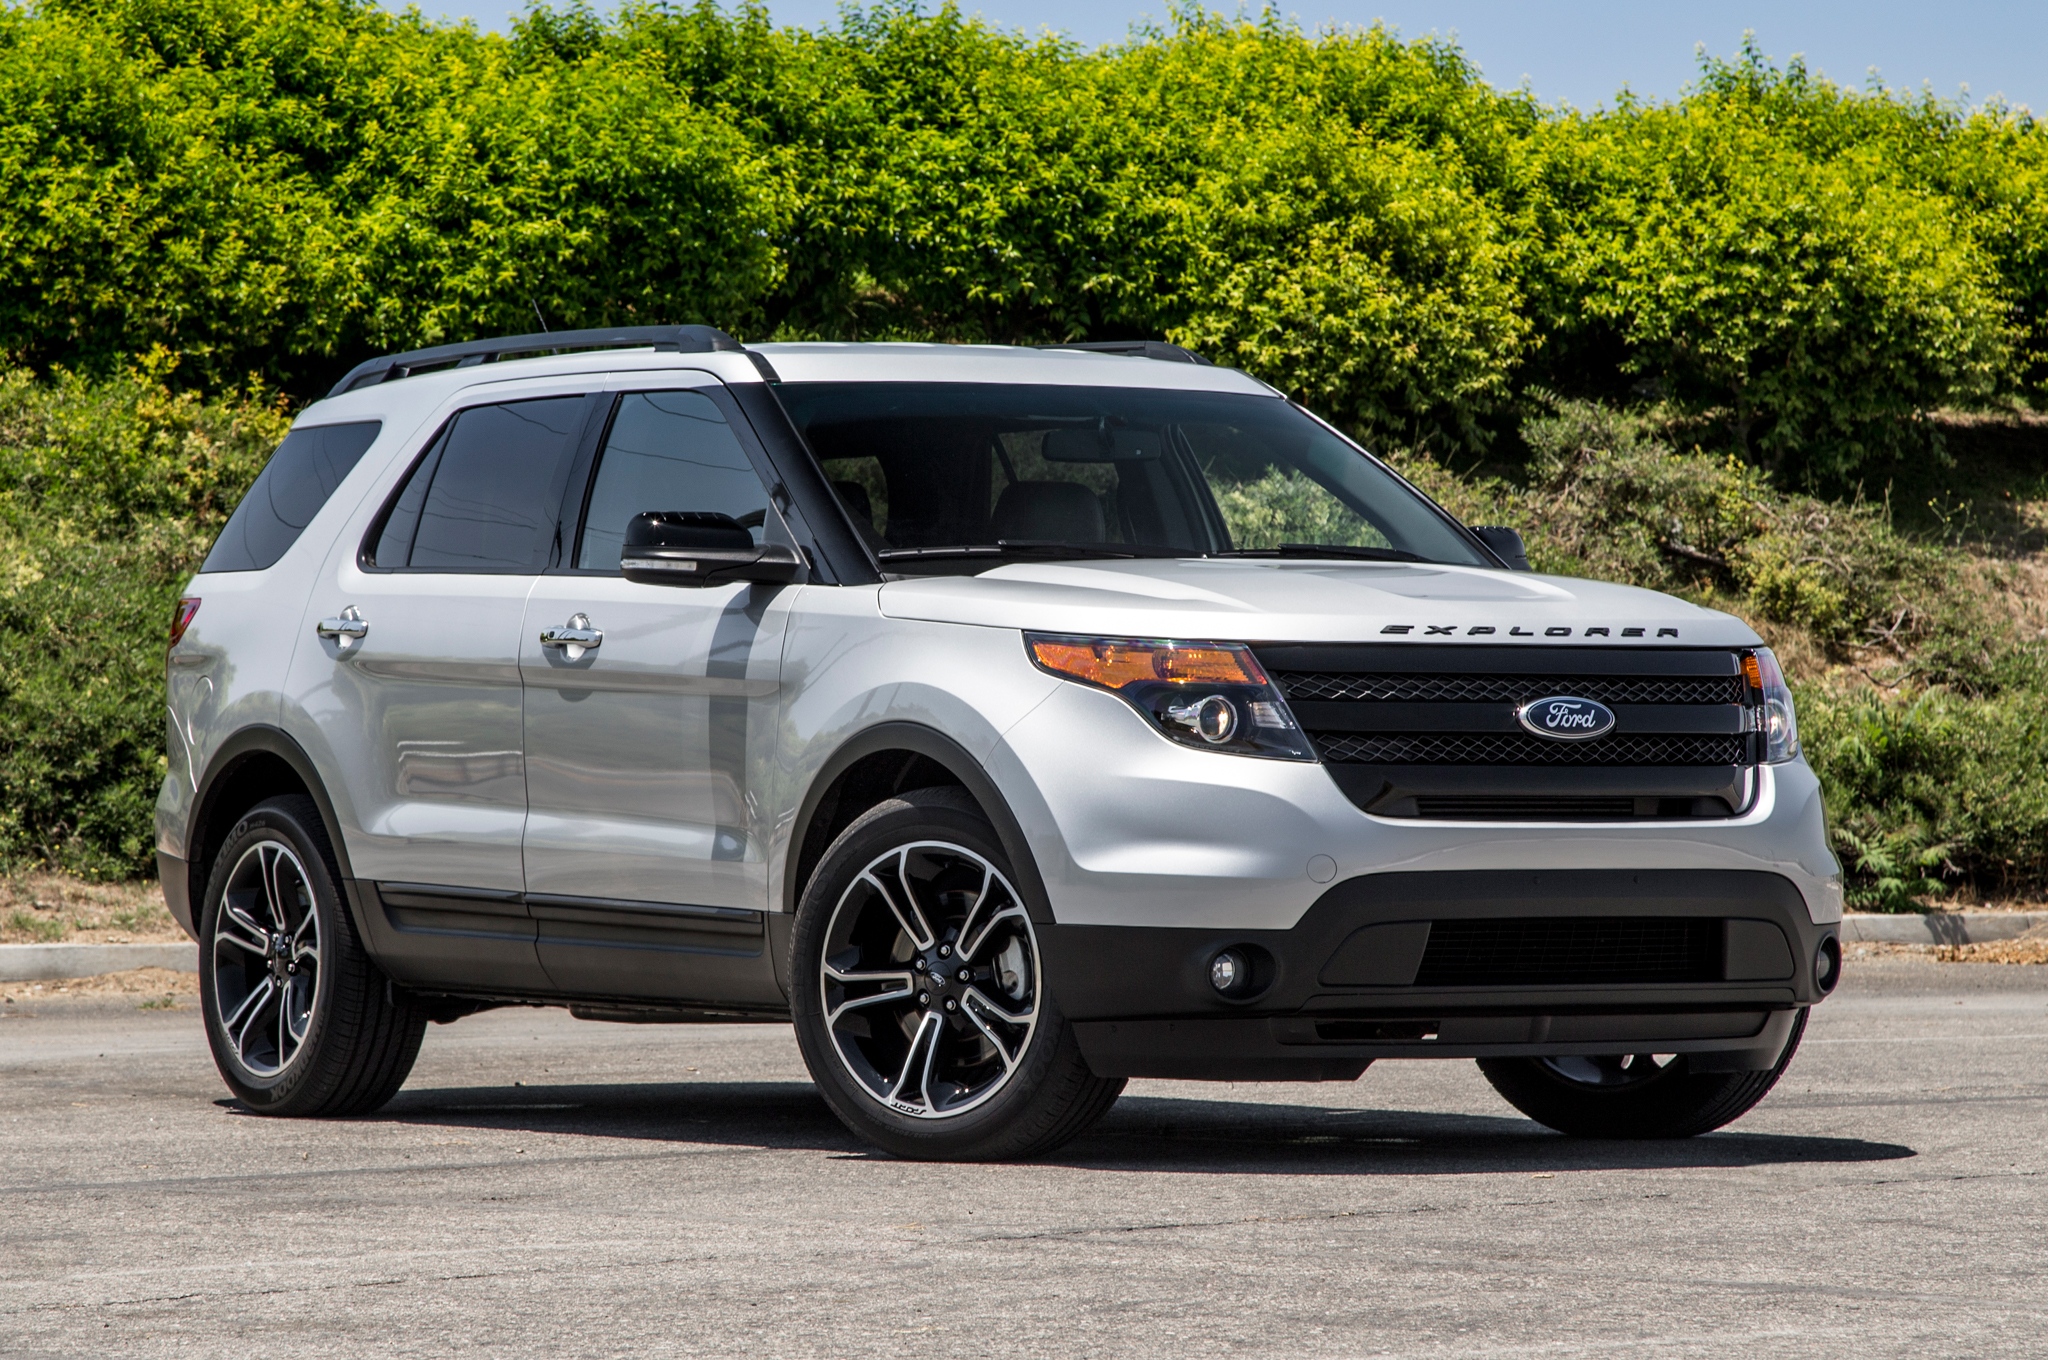 2013-ford-explorer-sport-ecoboost-4wd-front-view1